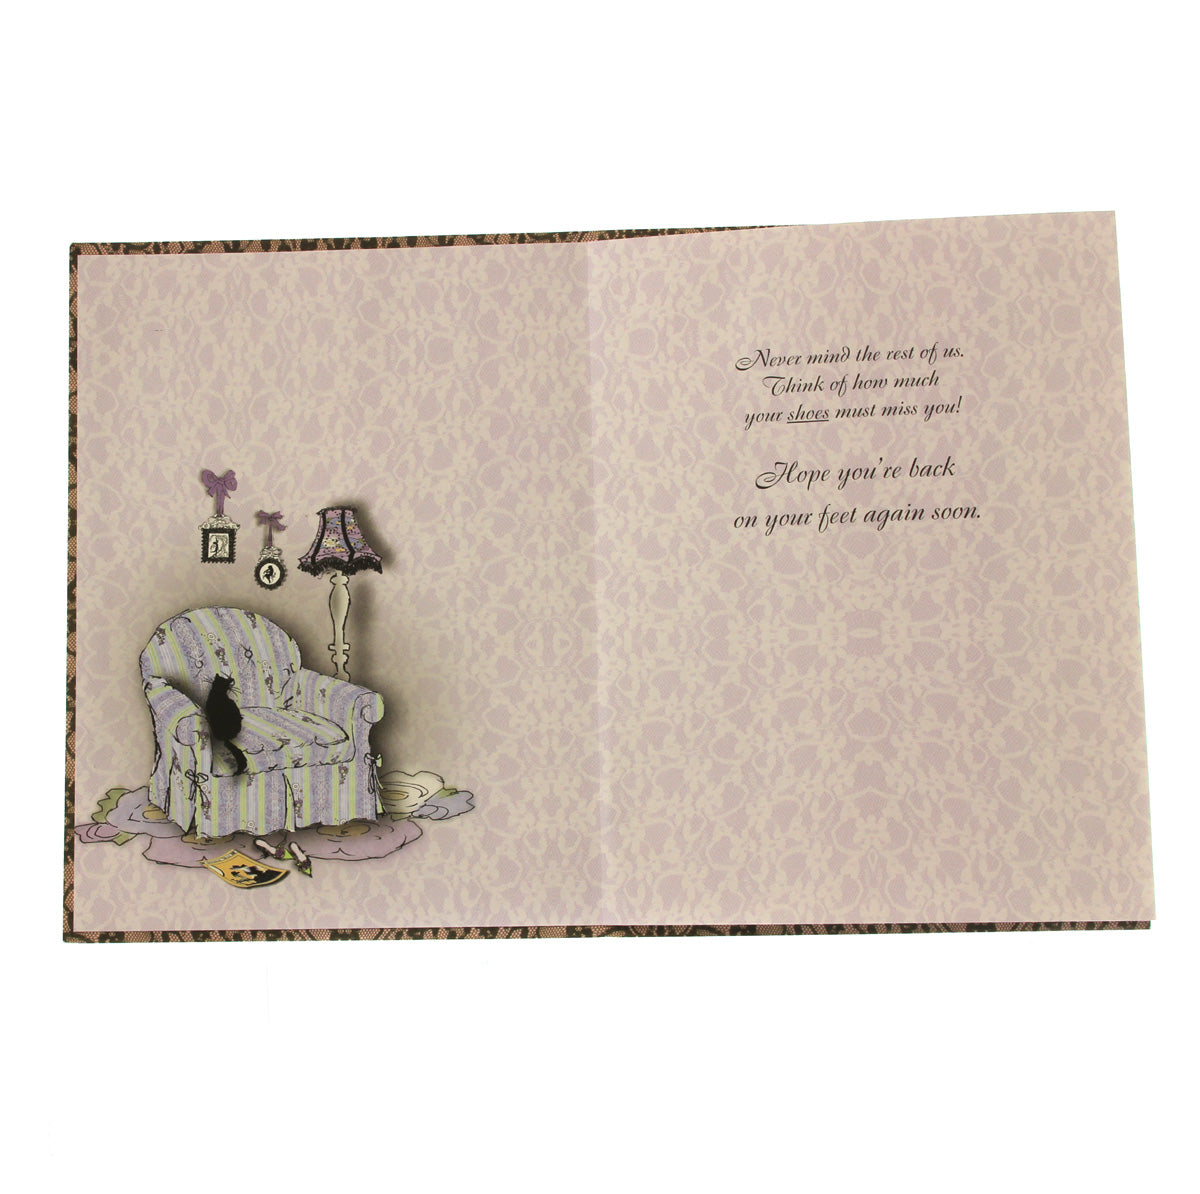 Get Well Card: Rest Up, Frou-Frou